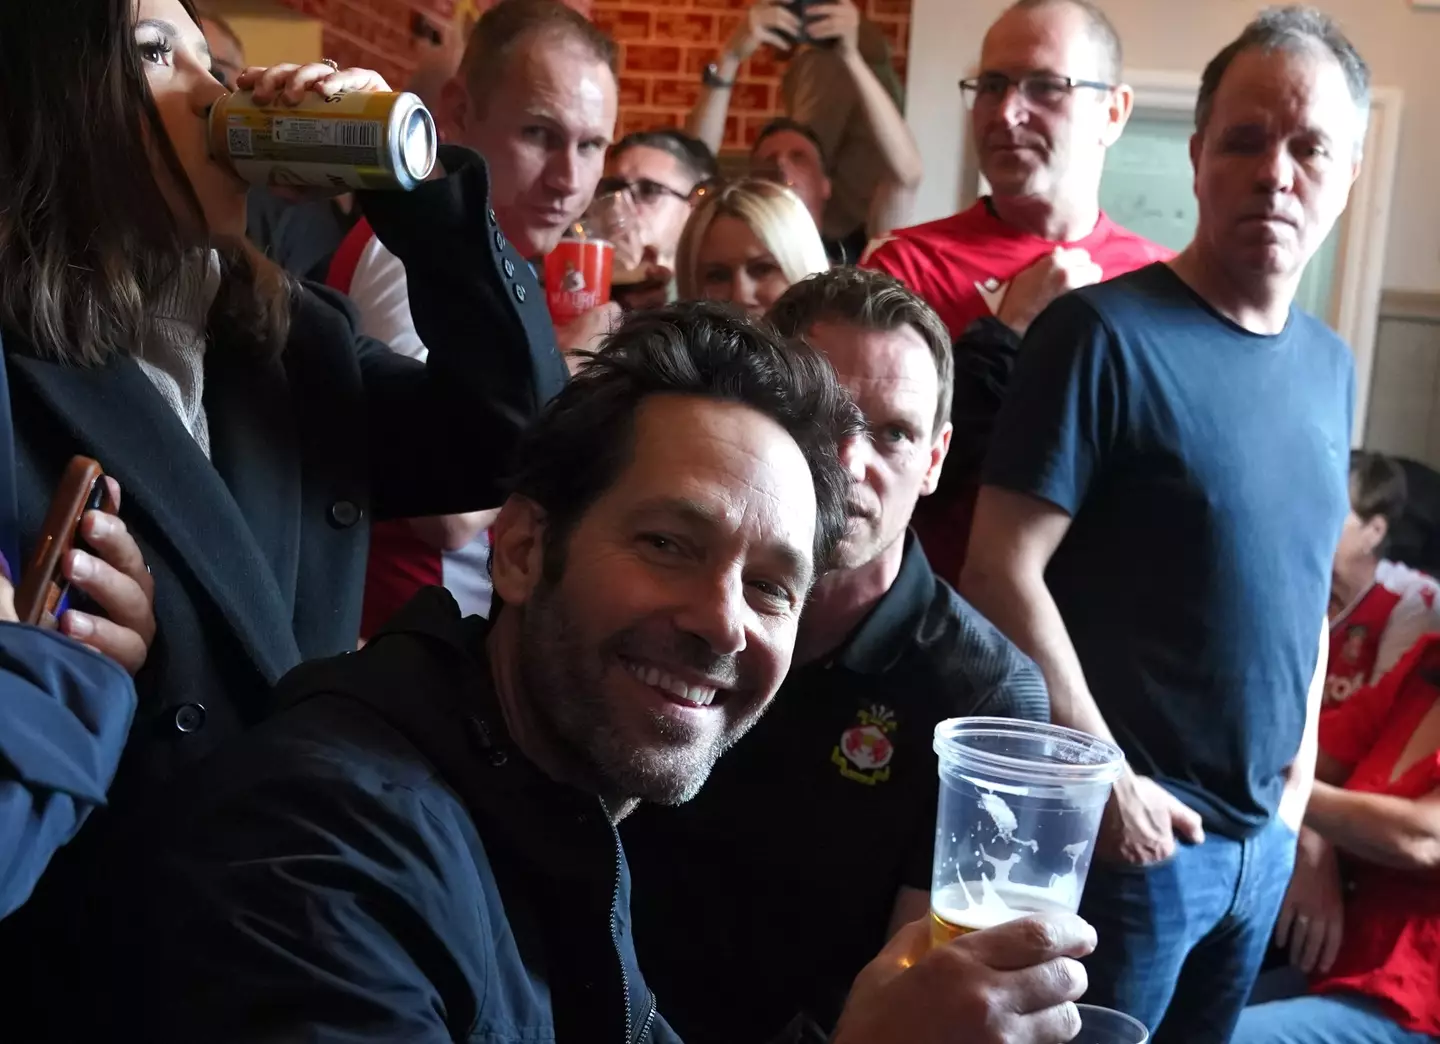 Paul Rudd stopped off at The Turf to celebrate the match.